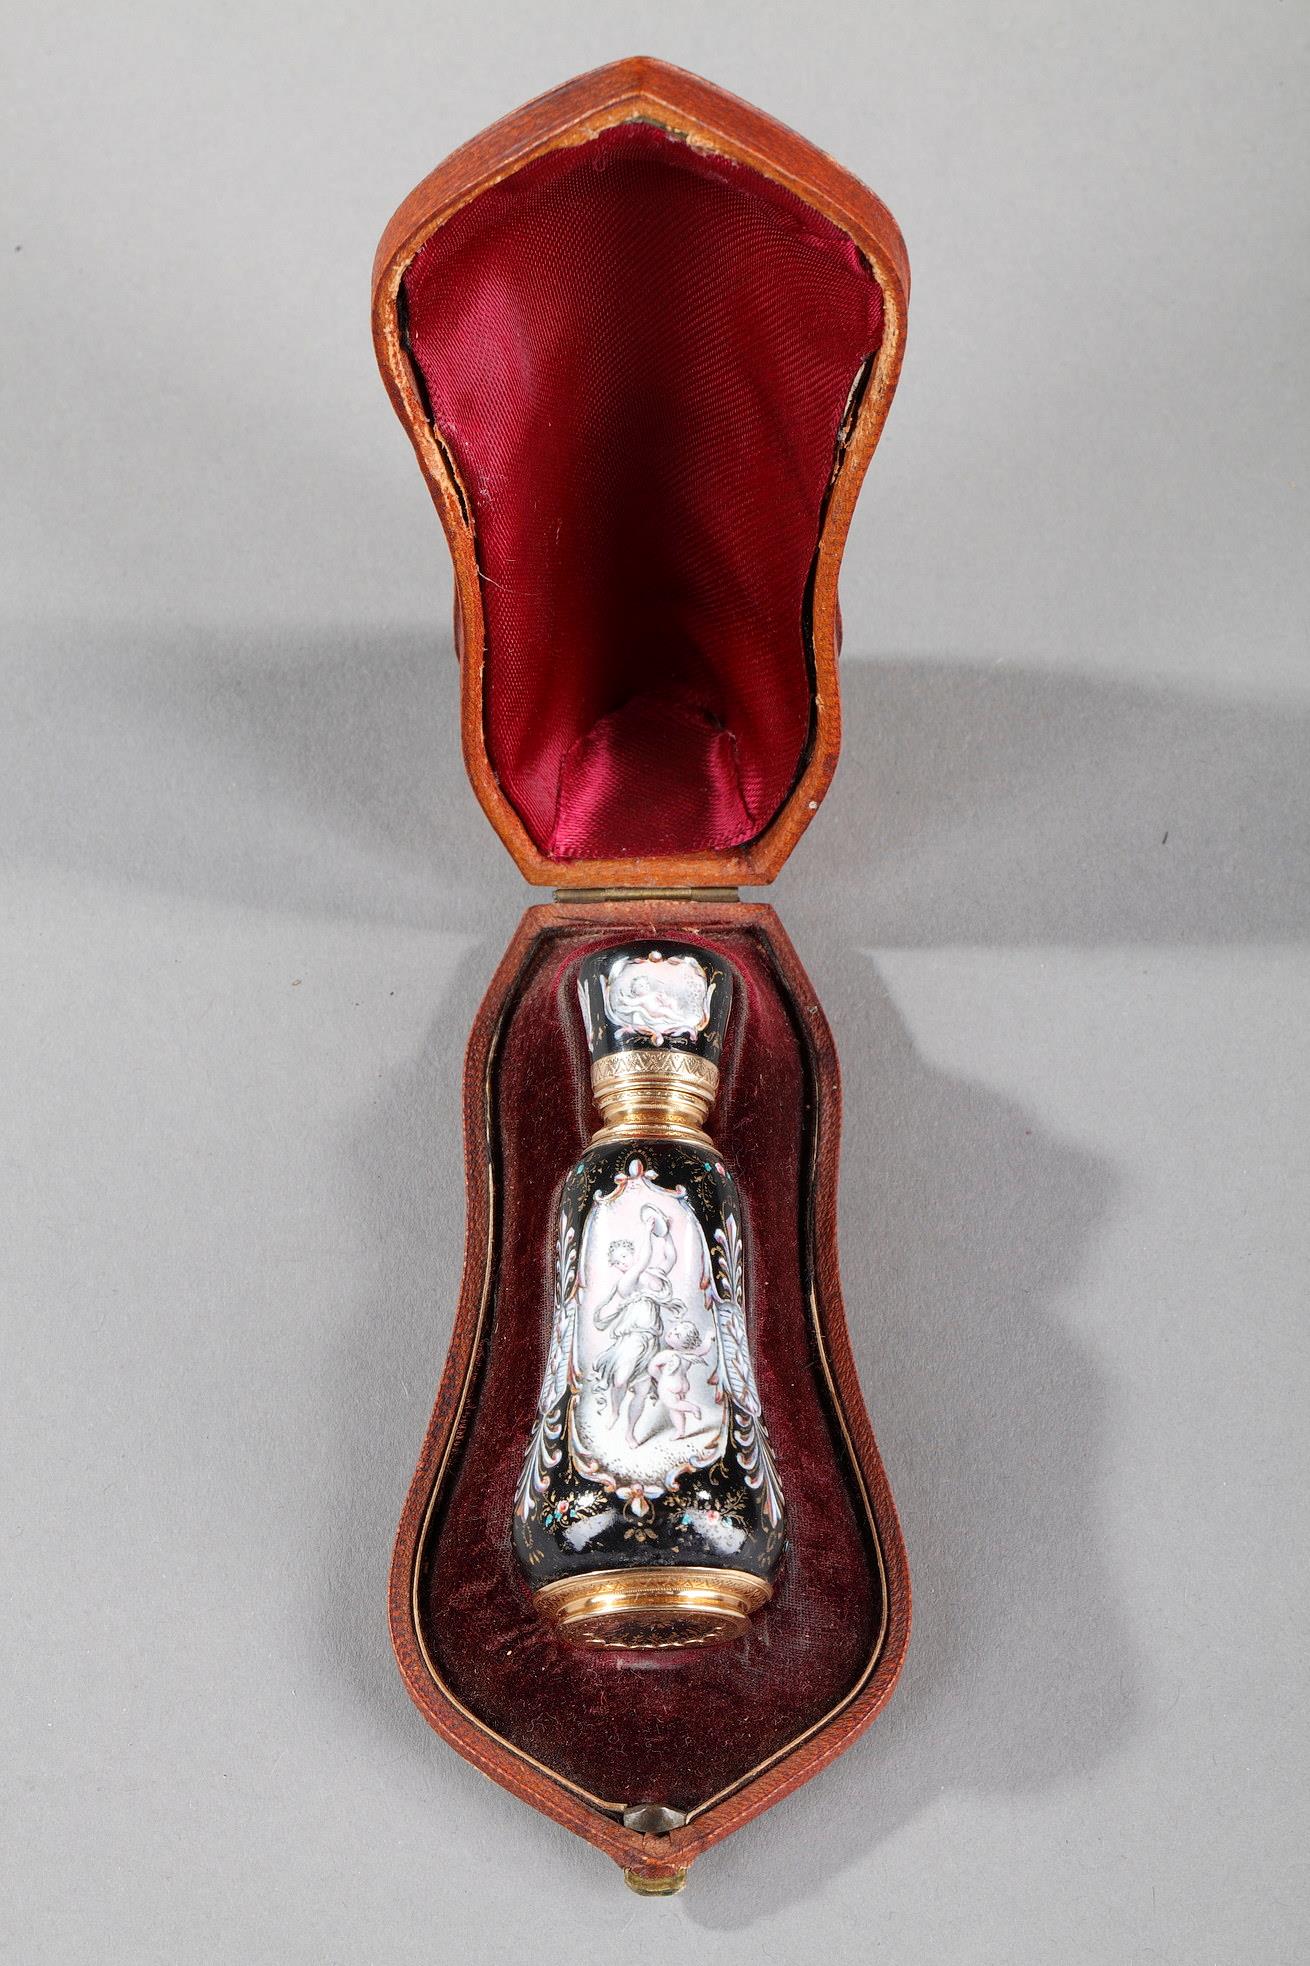 19th century Gold and enamel perfume flask. 